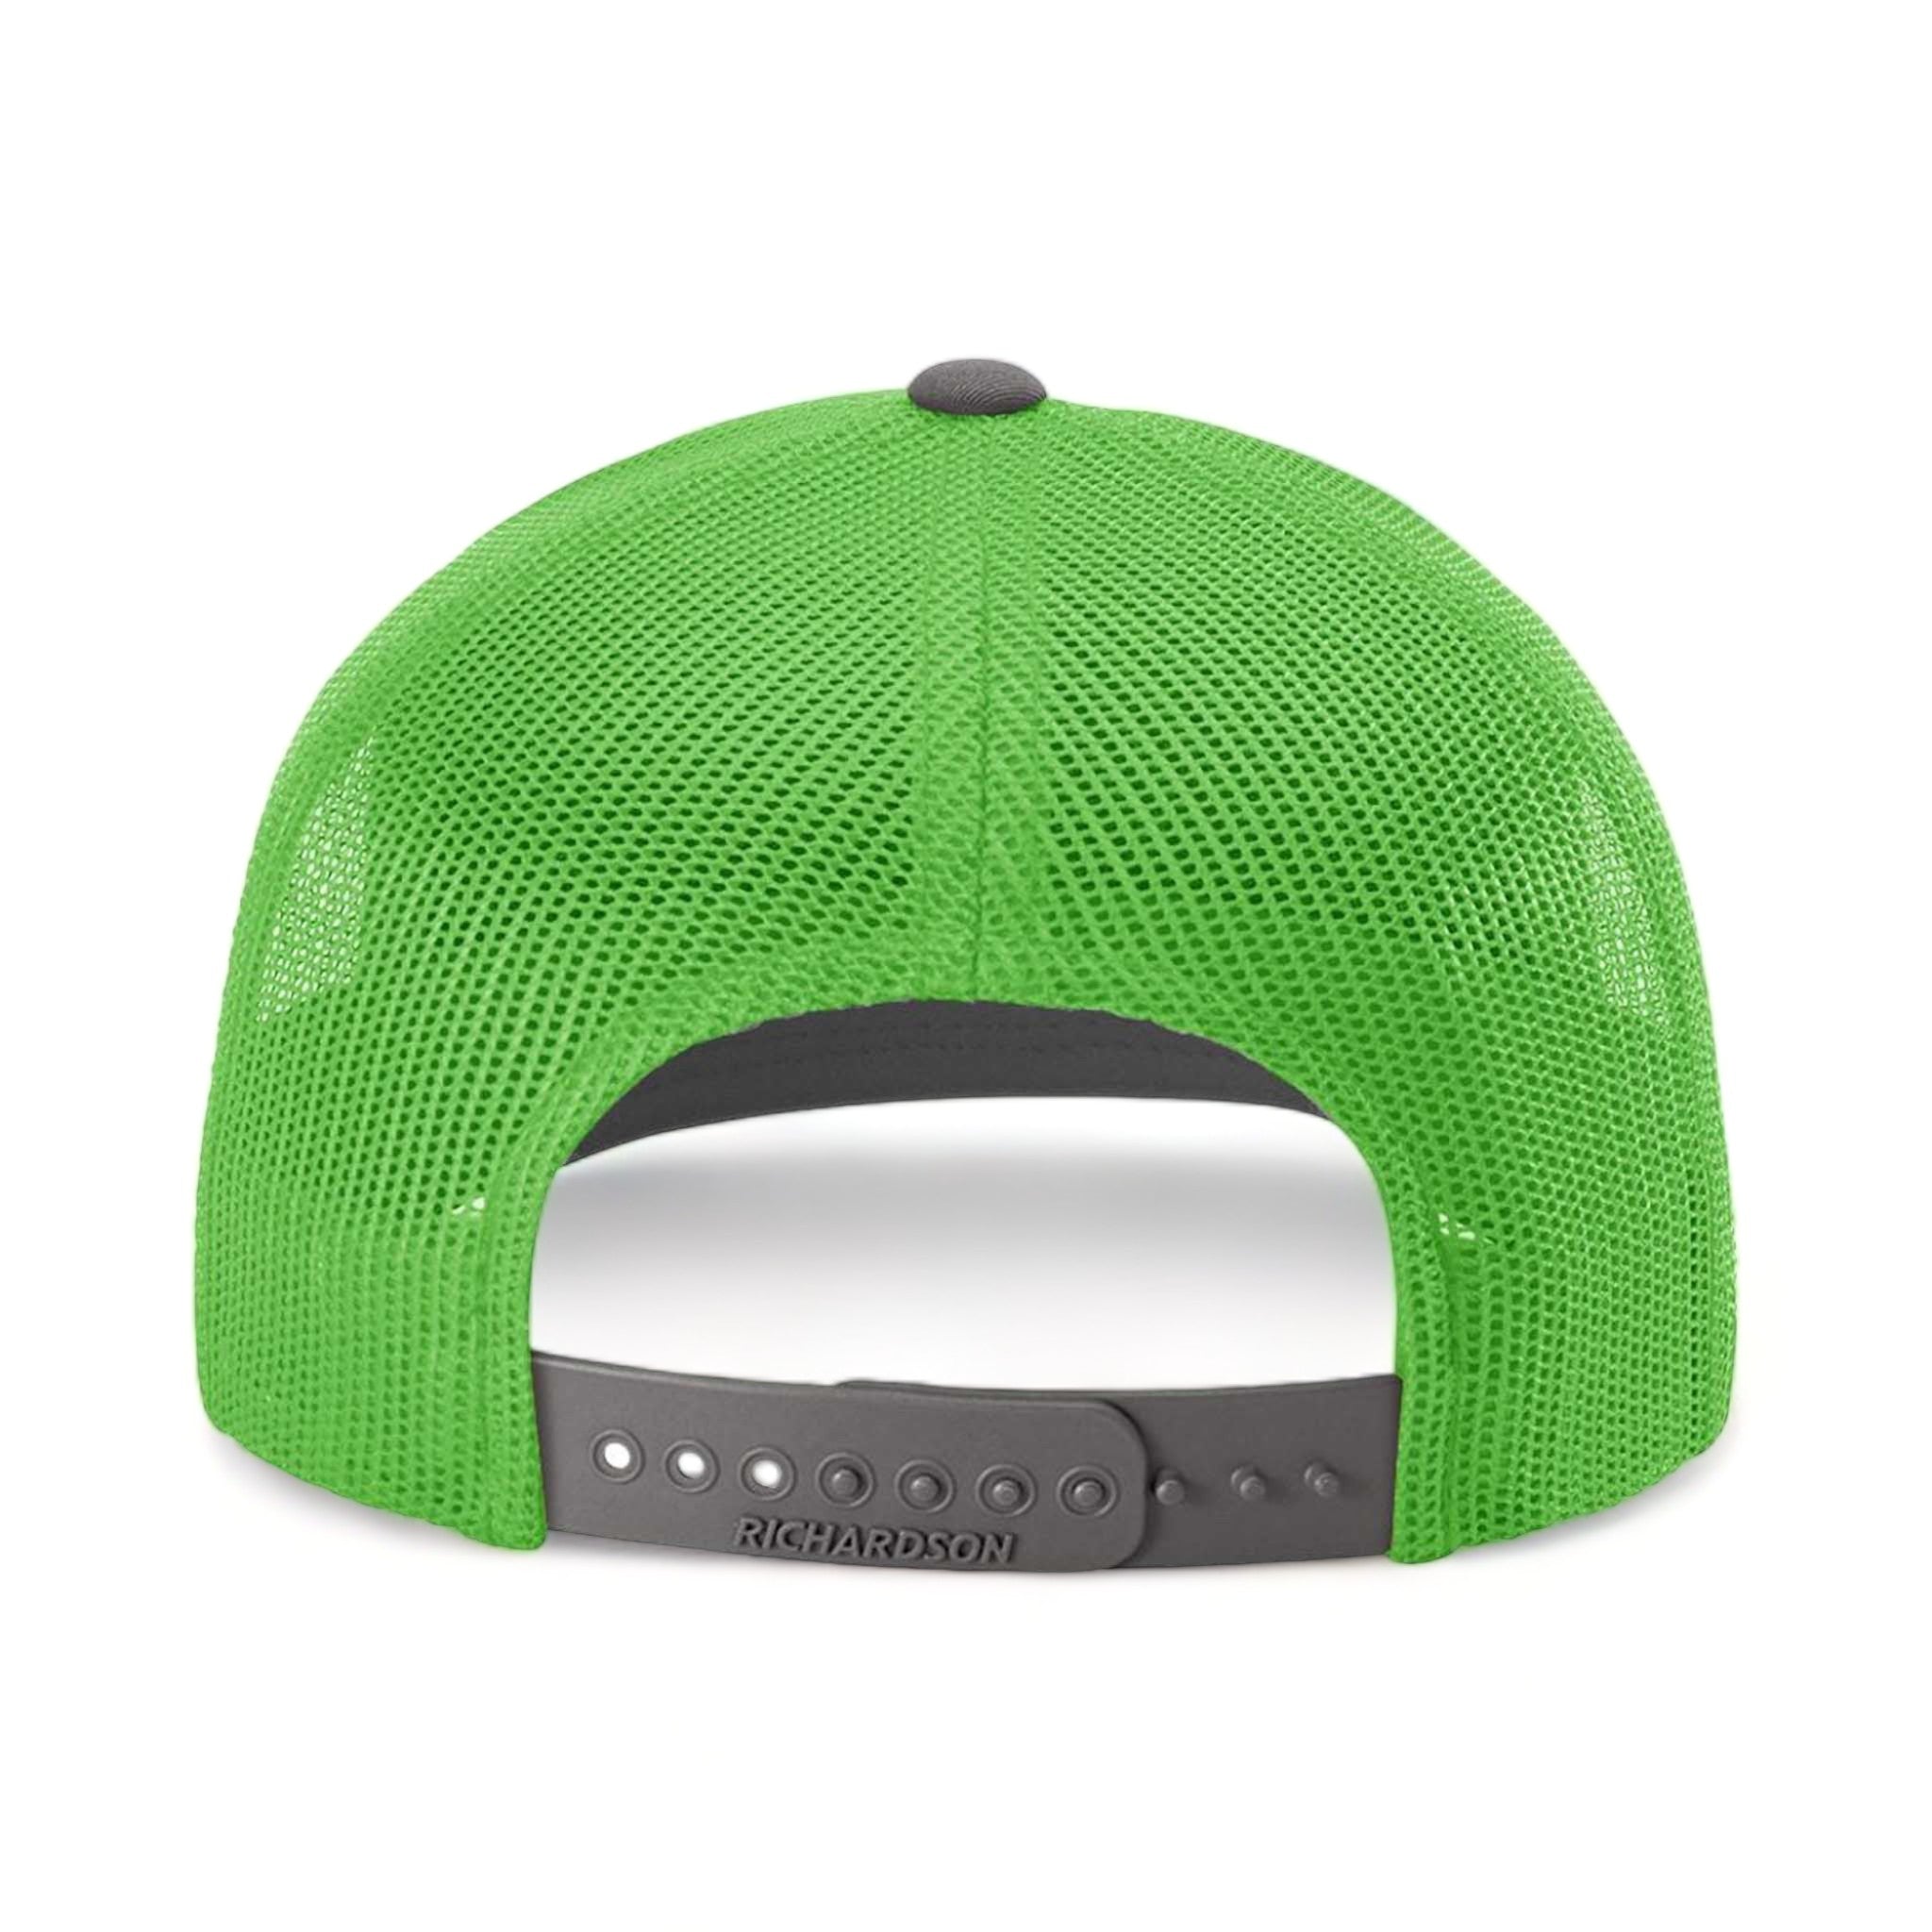 Back view of Richardson 112 custom hat in charcoal and neon green